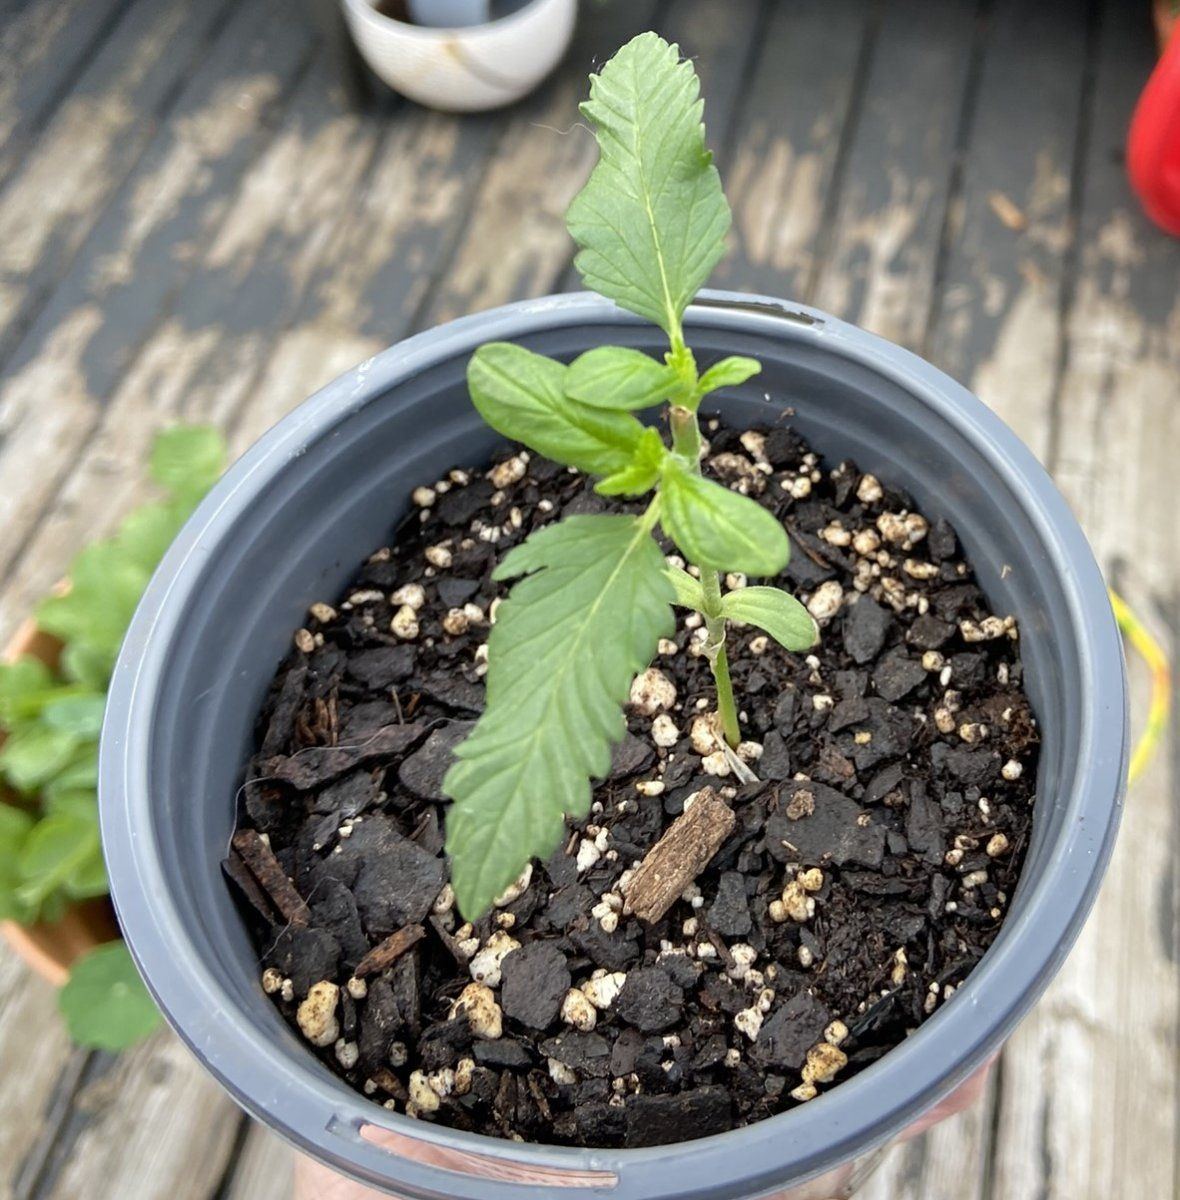 First grow struggling to solve issues with two plants one growing only 3 fingered leaves one 